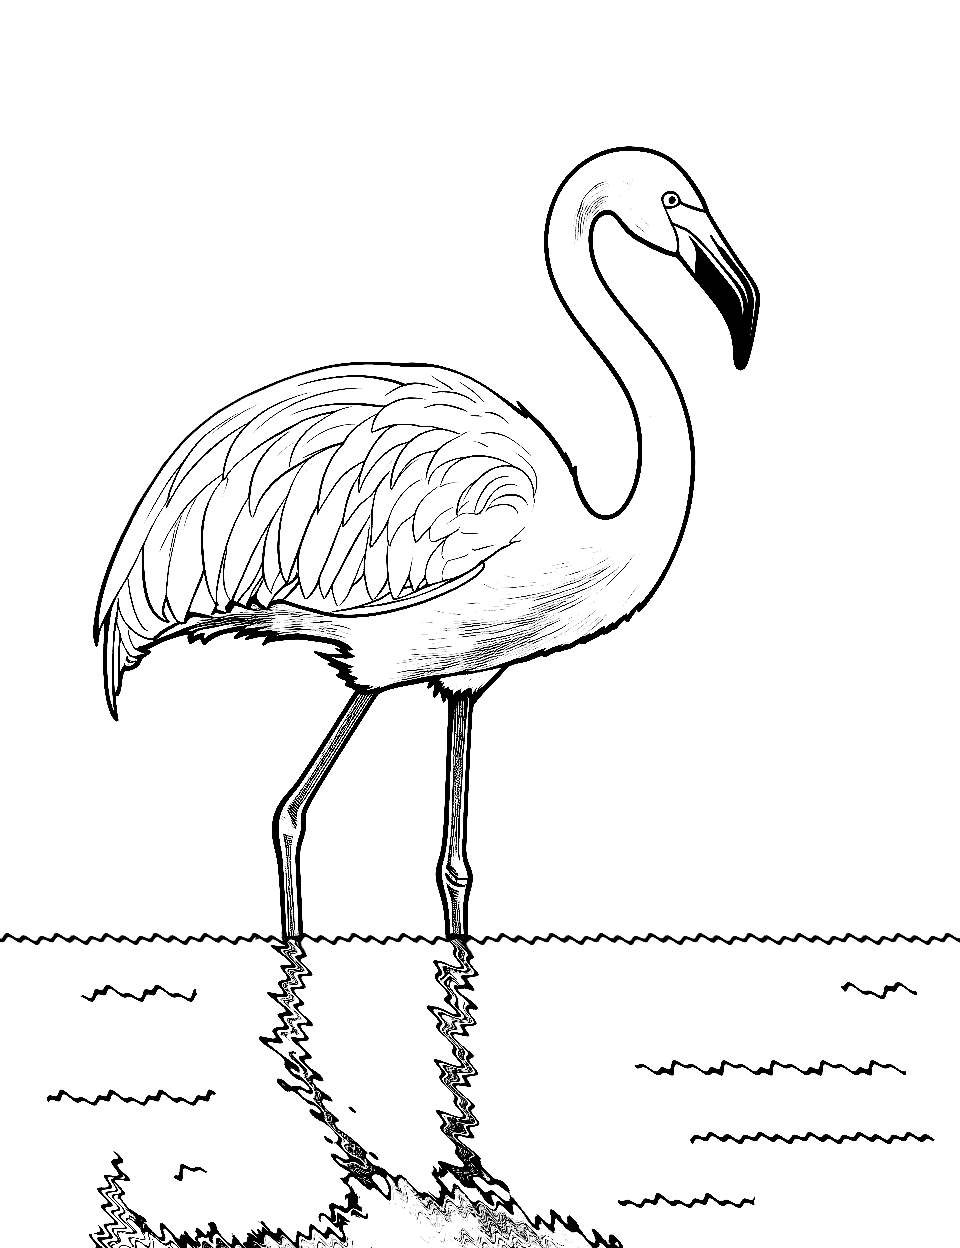 Realistic Flamingo in Water Coloring Page - A realistic depiction of a flamingo wading through water with a reflection on the surface.